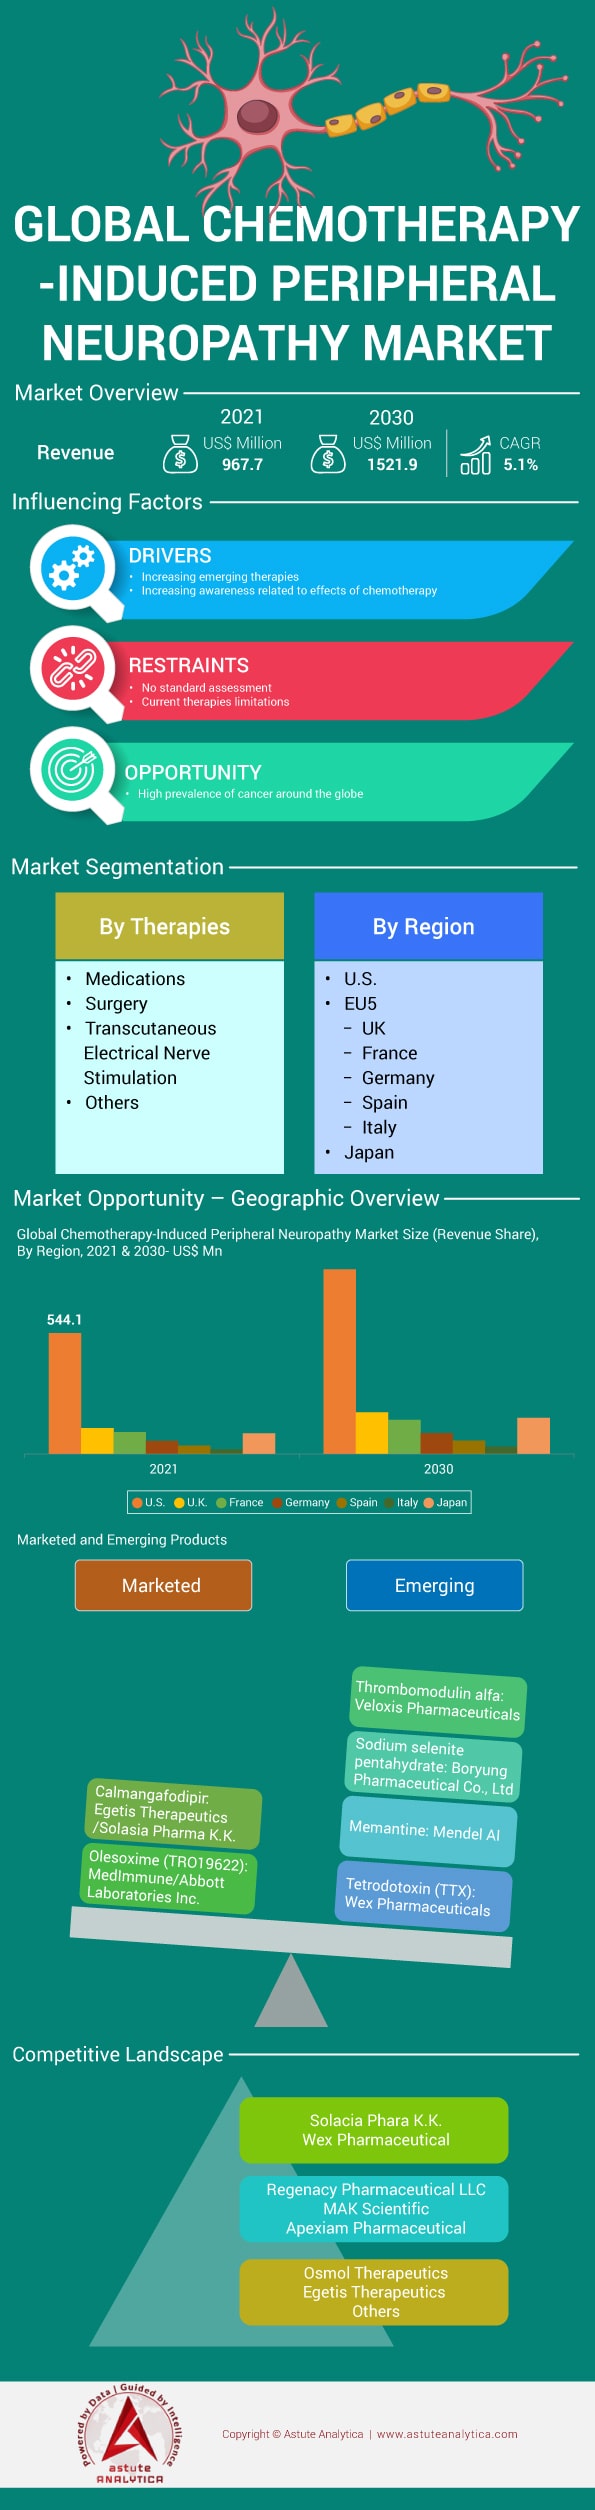 Chemotherapy-induced peripheral neuropathy Market